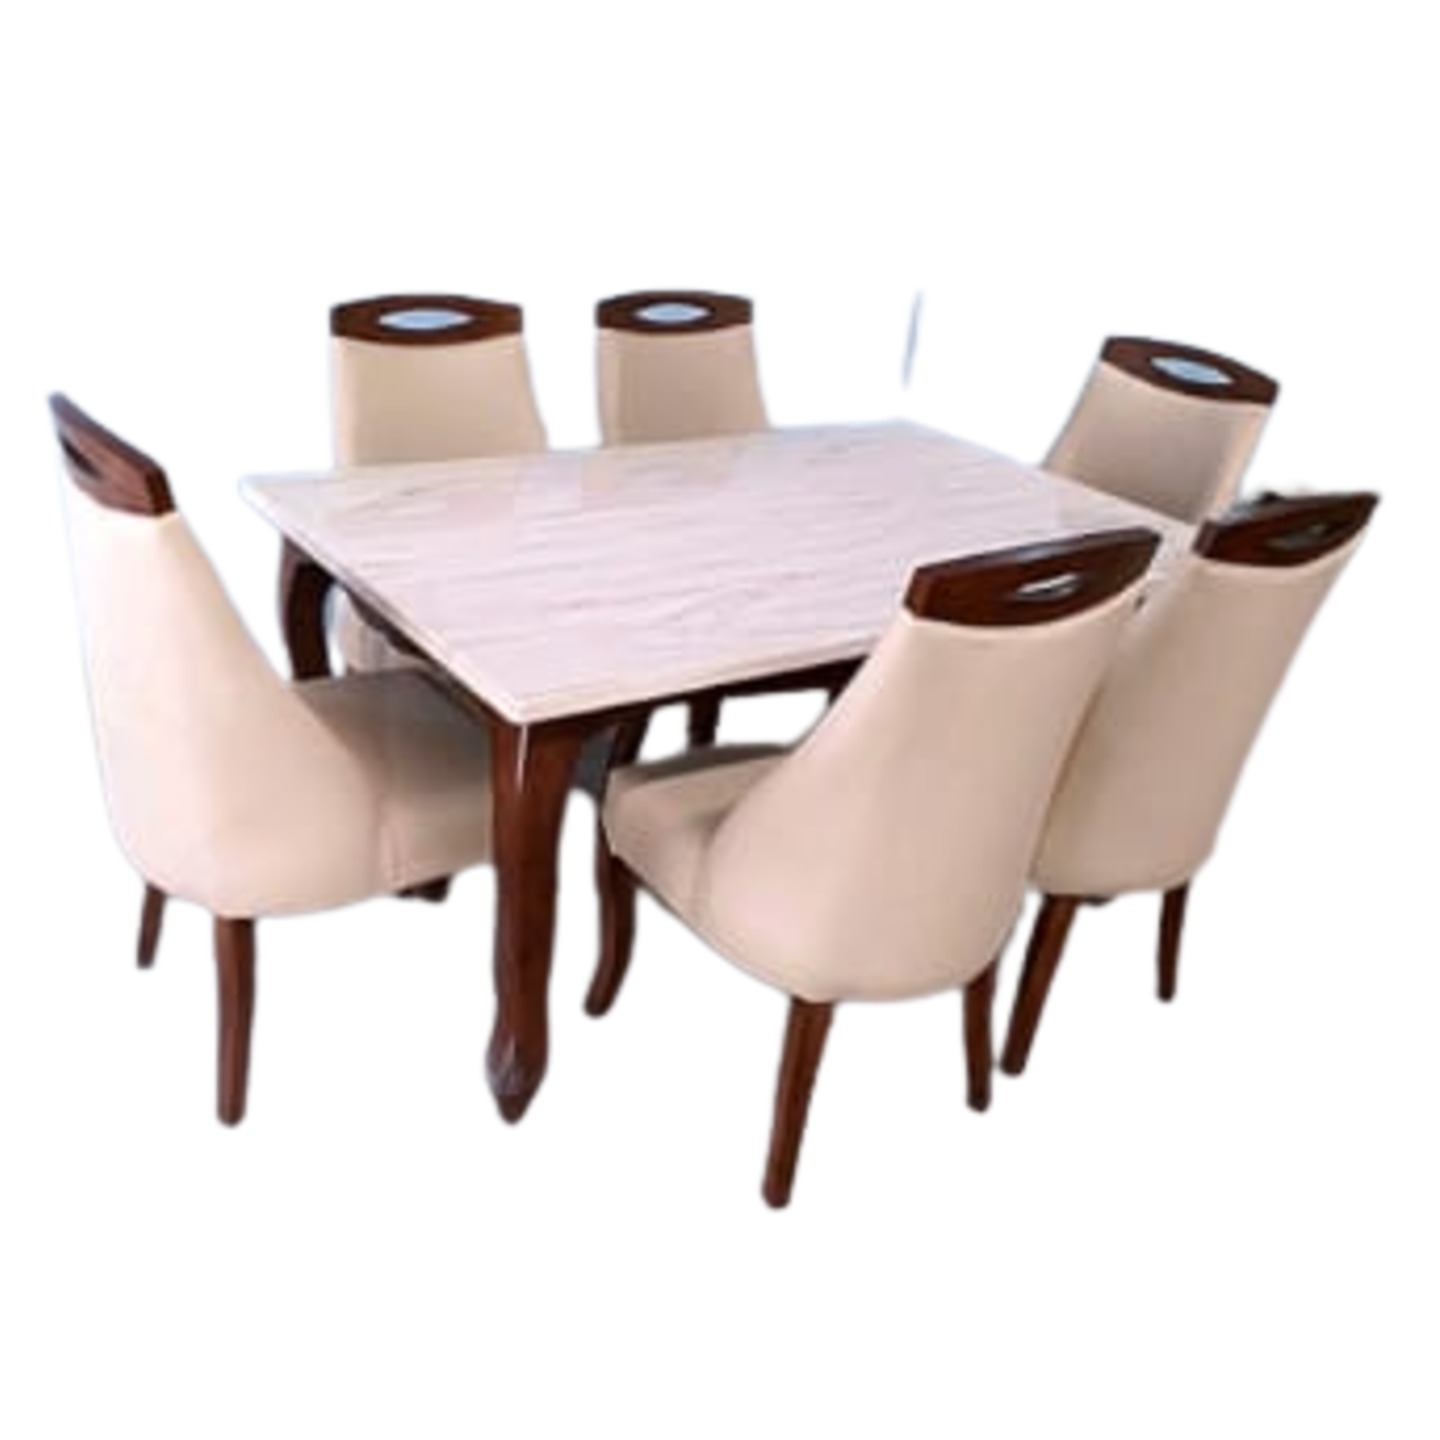 DW Marble Top H-007 Six Seater Dining Table Set in Brown Colour